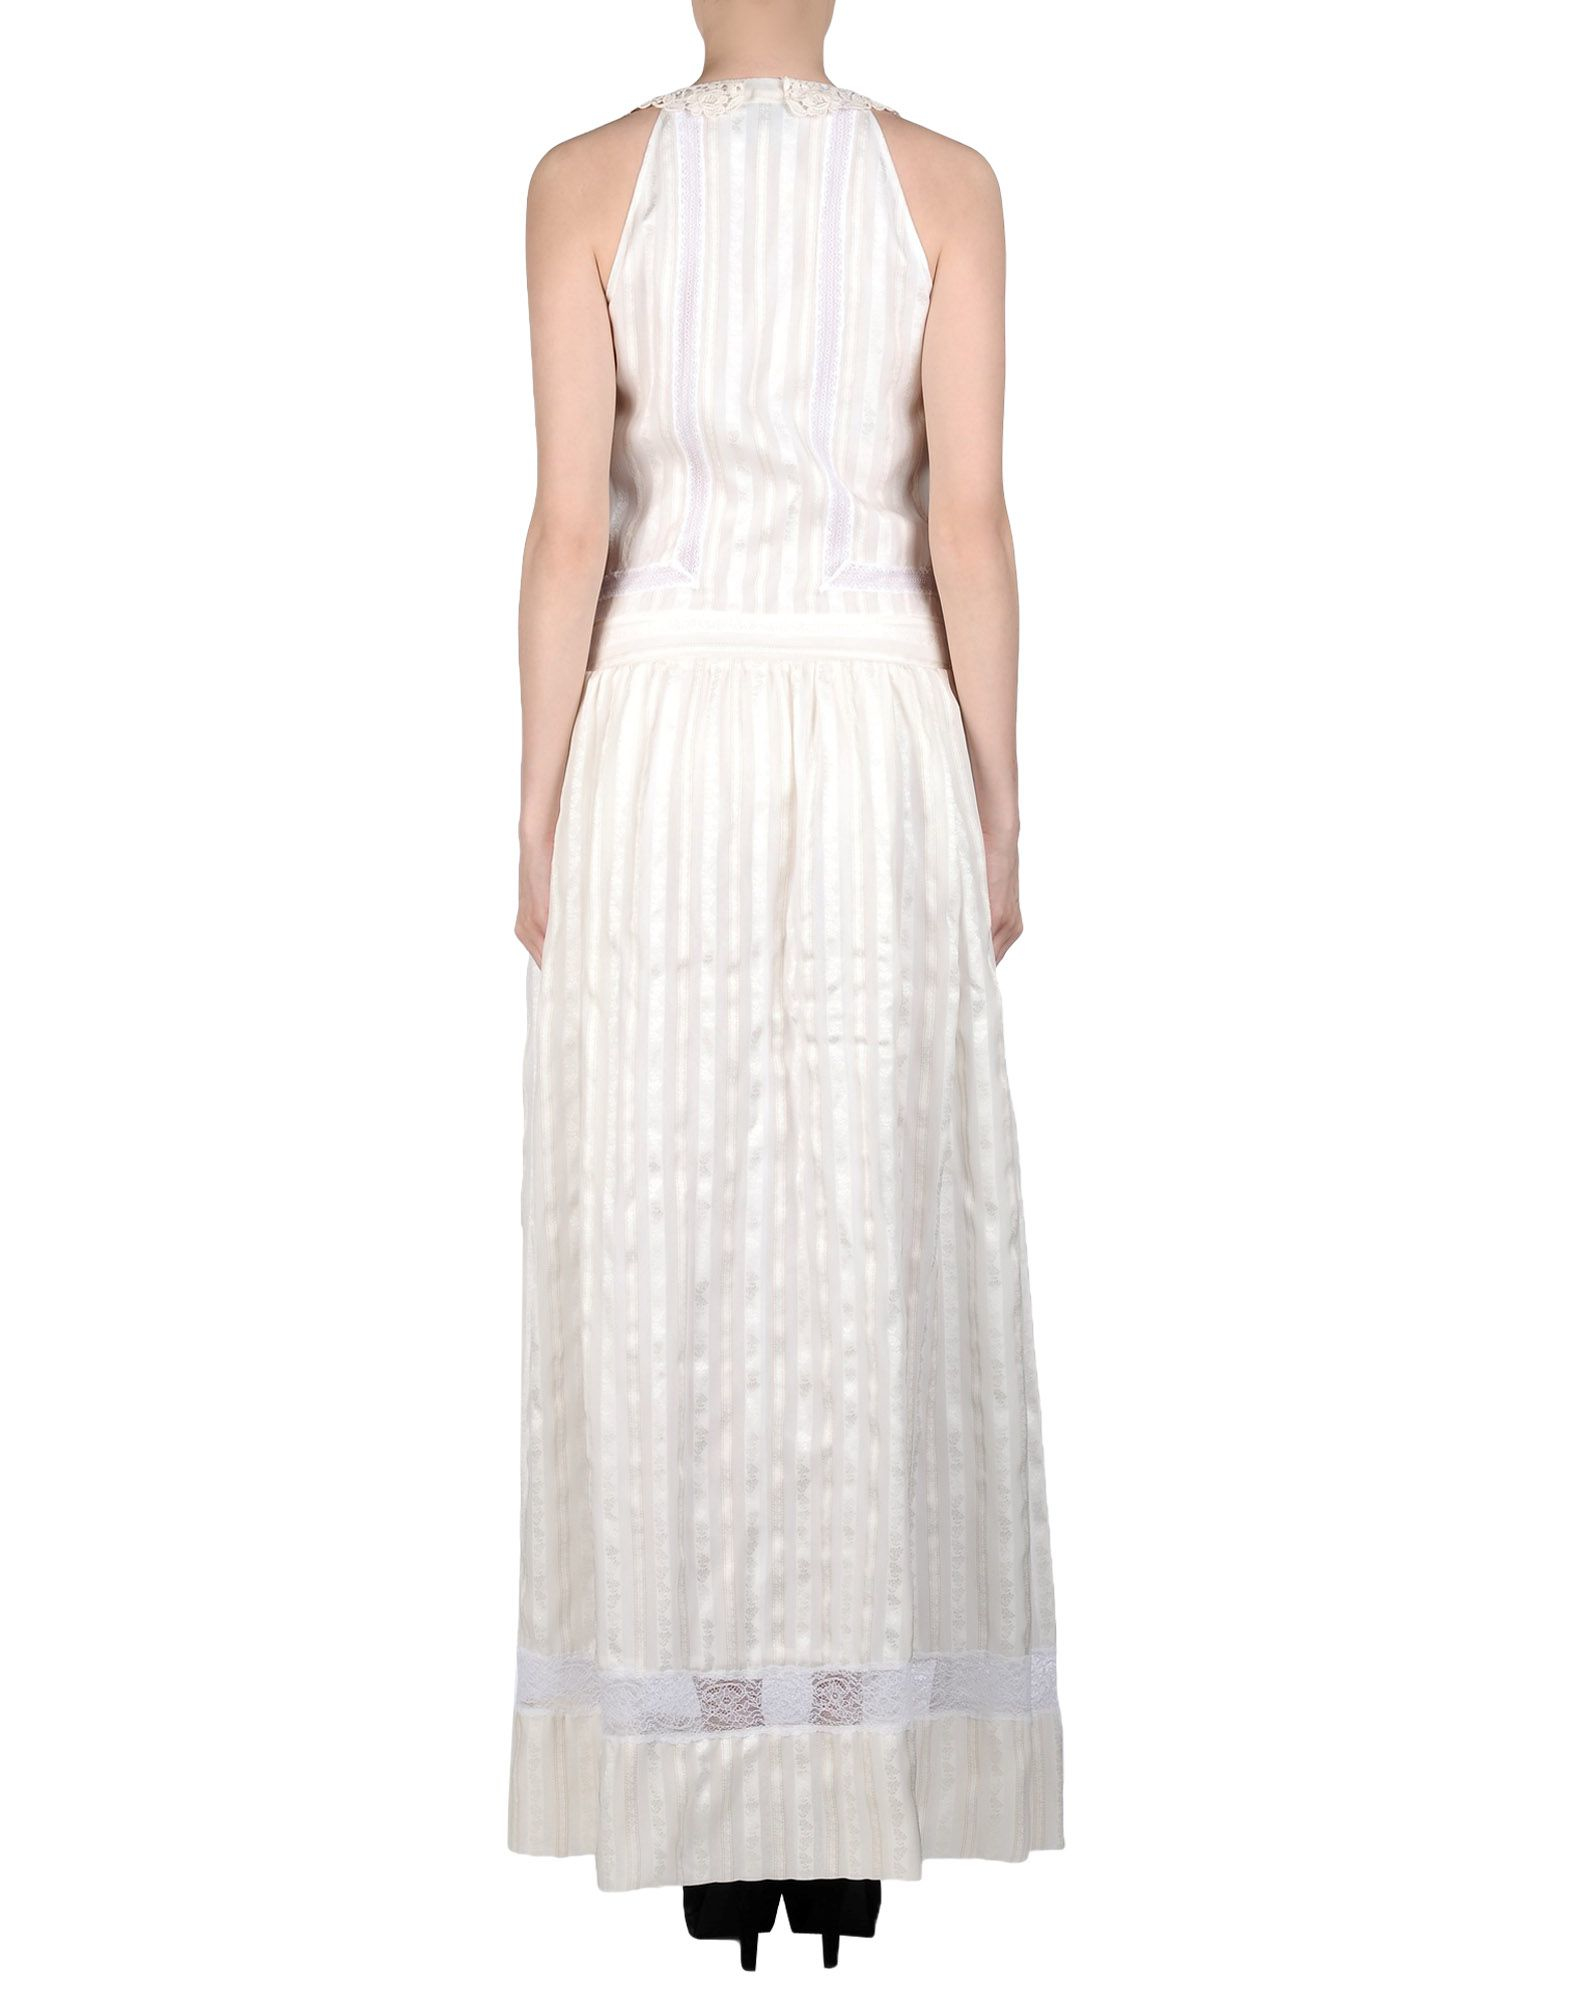 Class Roberto Cavalli Lace Long Dress in Ivory (White) - Lyst